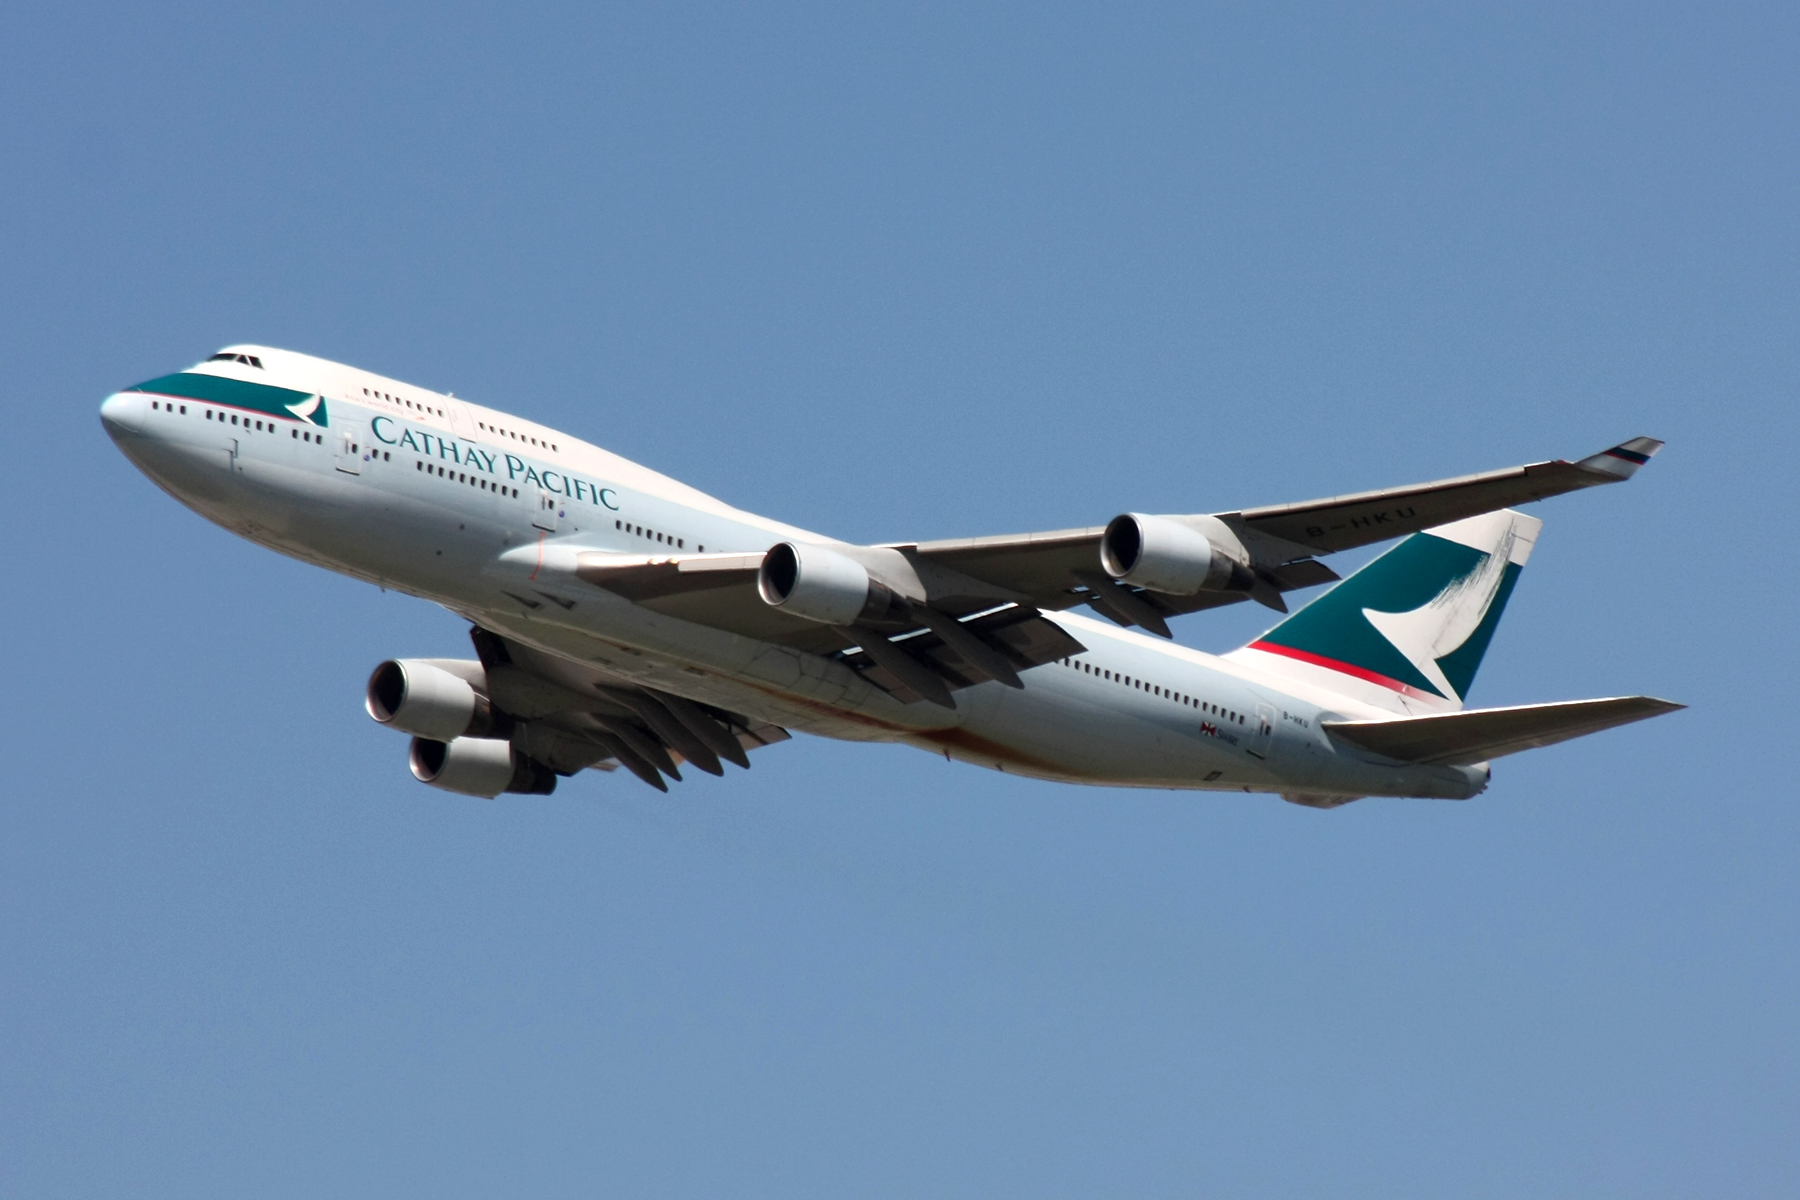 cathay-pacific-retires-747-after-37-years-of-service-point-me-to-the-plane